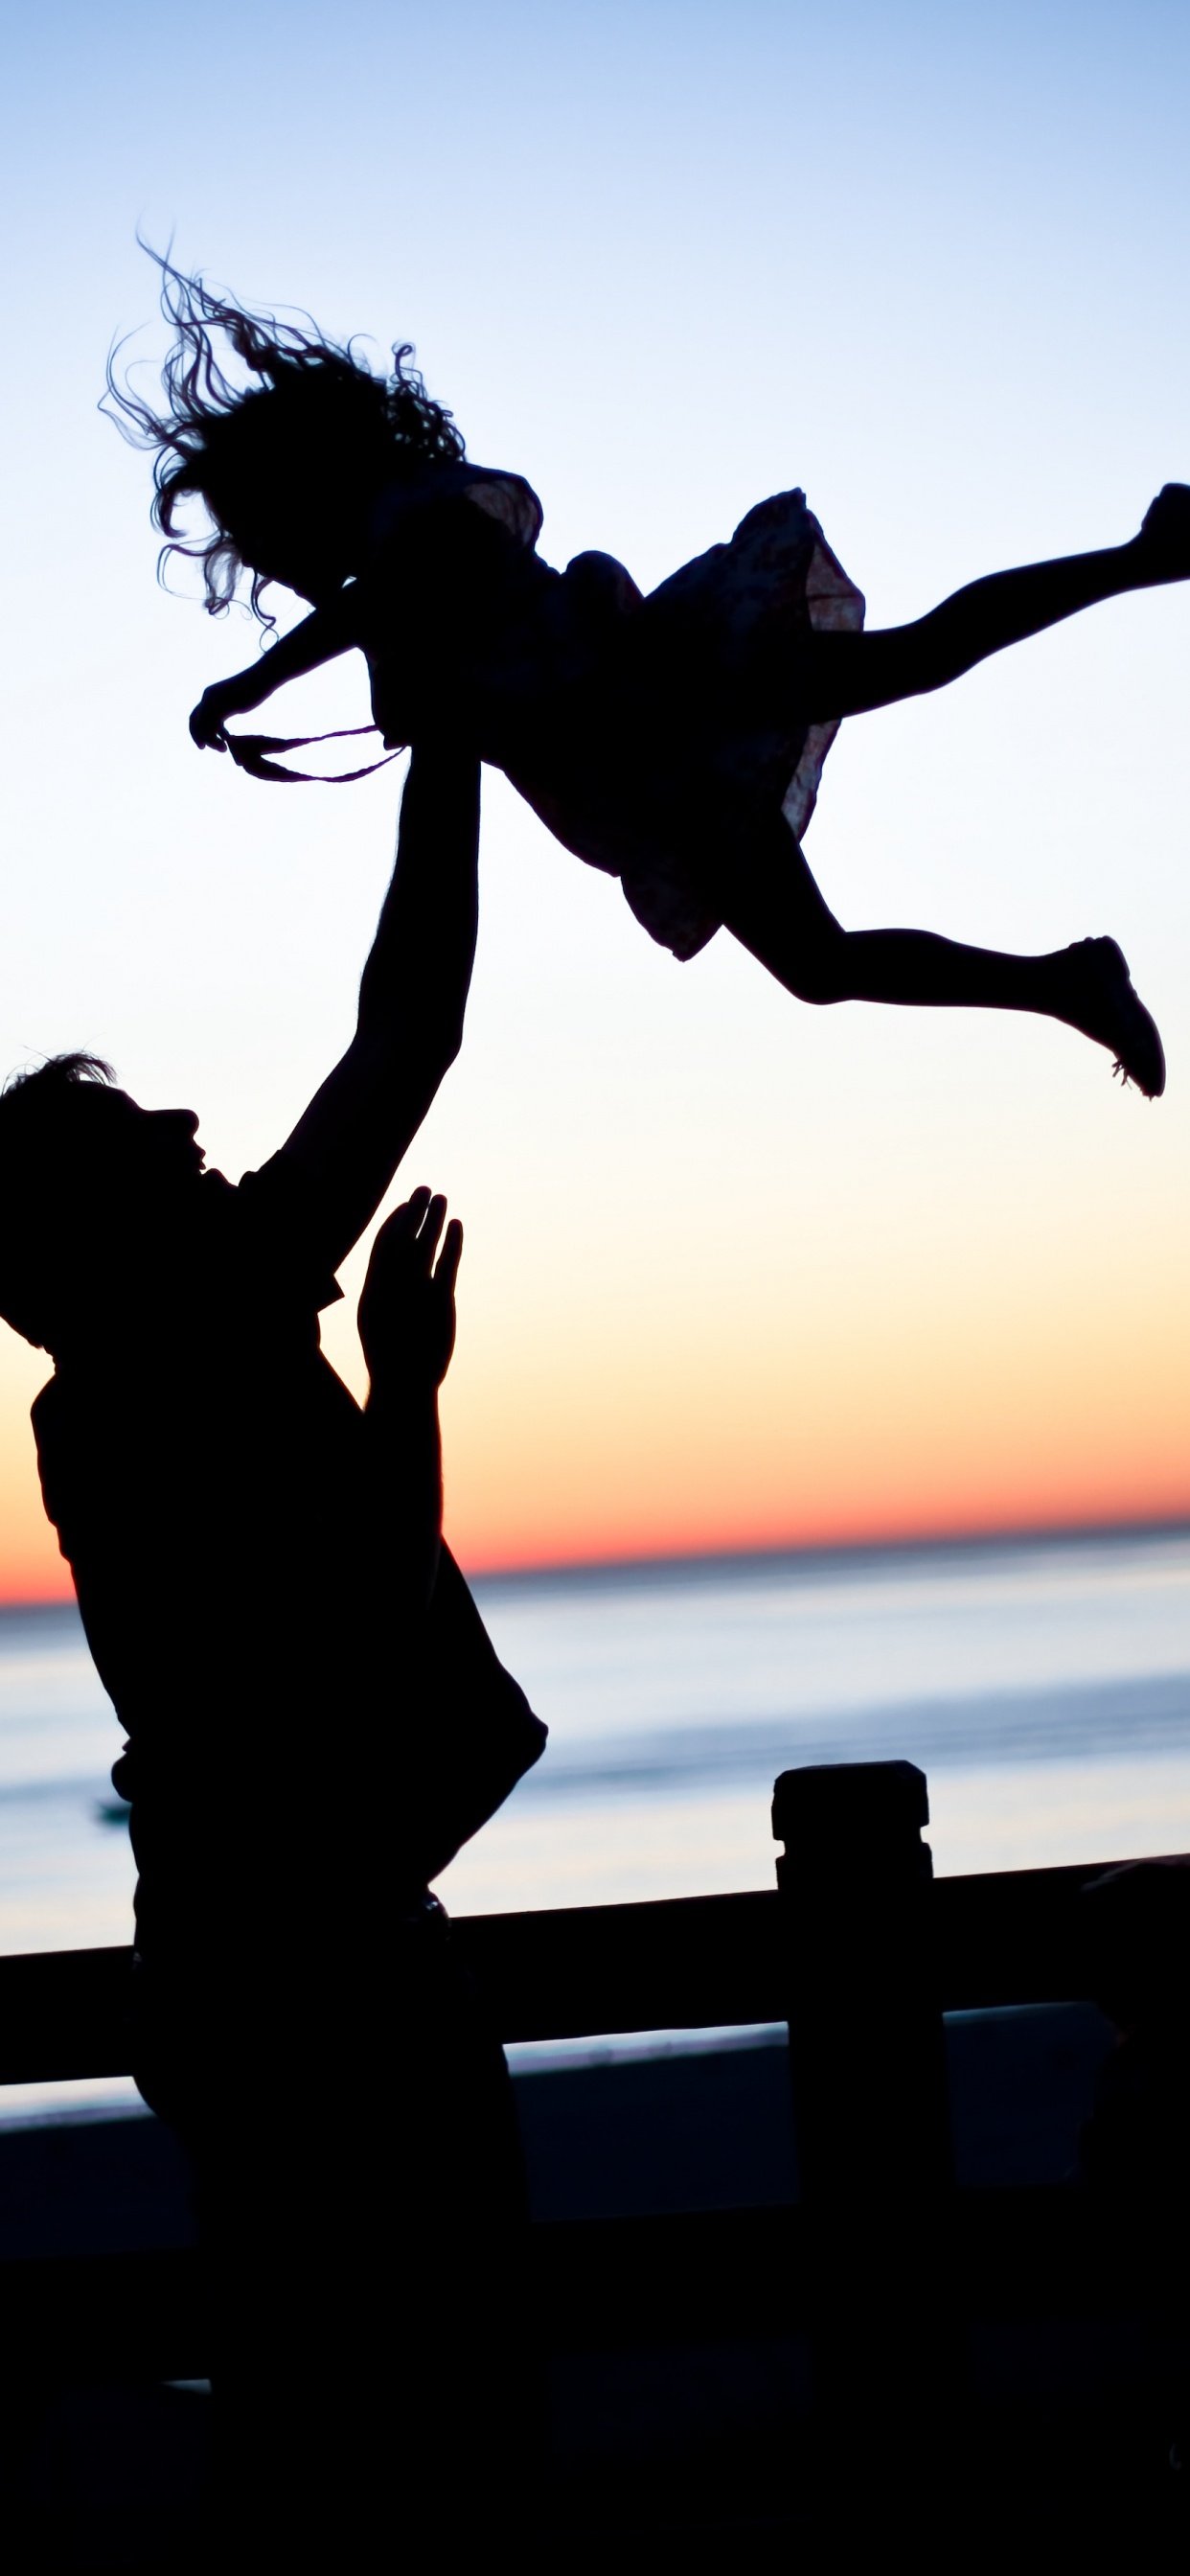 Father, Daughter, Family, People in Nature, Jumping. Wallpaper in 1242x2688 Resolution